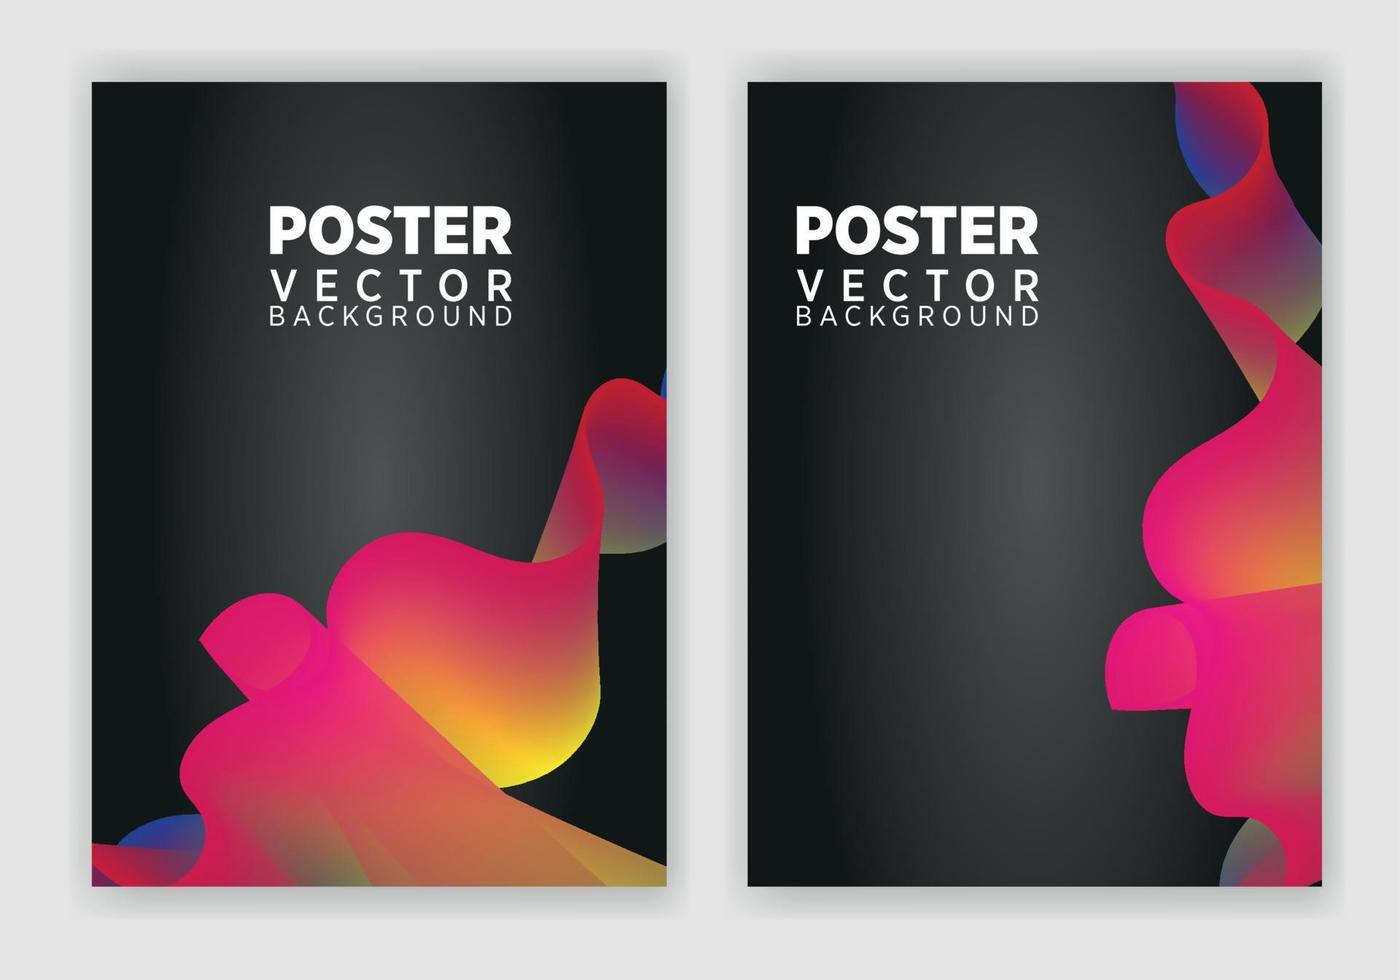 Set of Editable poster template. Can be used for poster, brochure, magazine vector